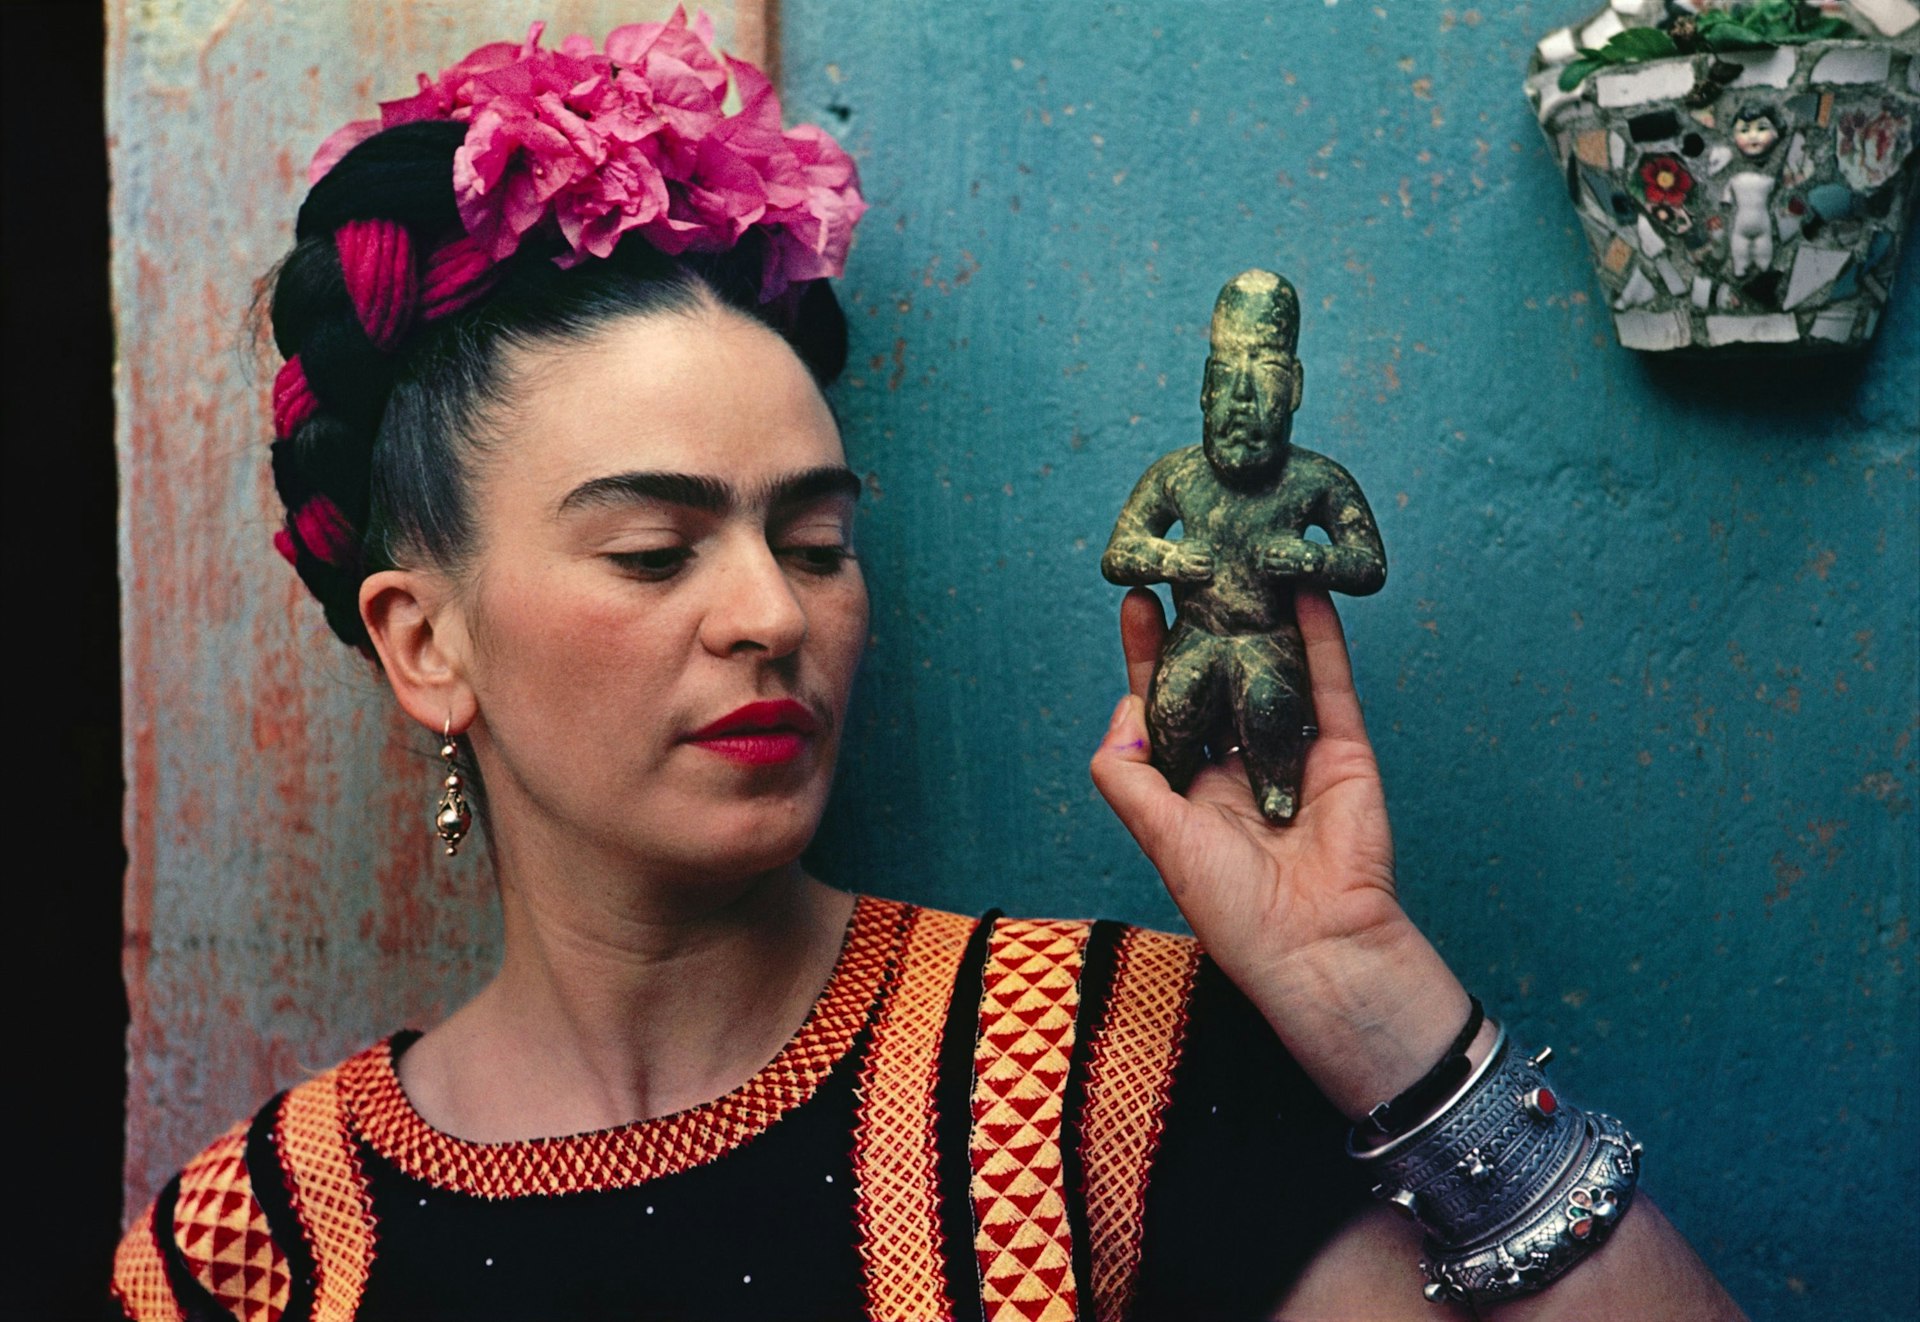 A tribute to the incredible visual legacy of Frida Kahlo